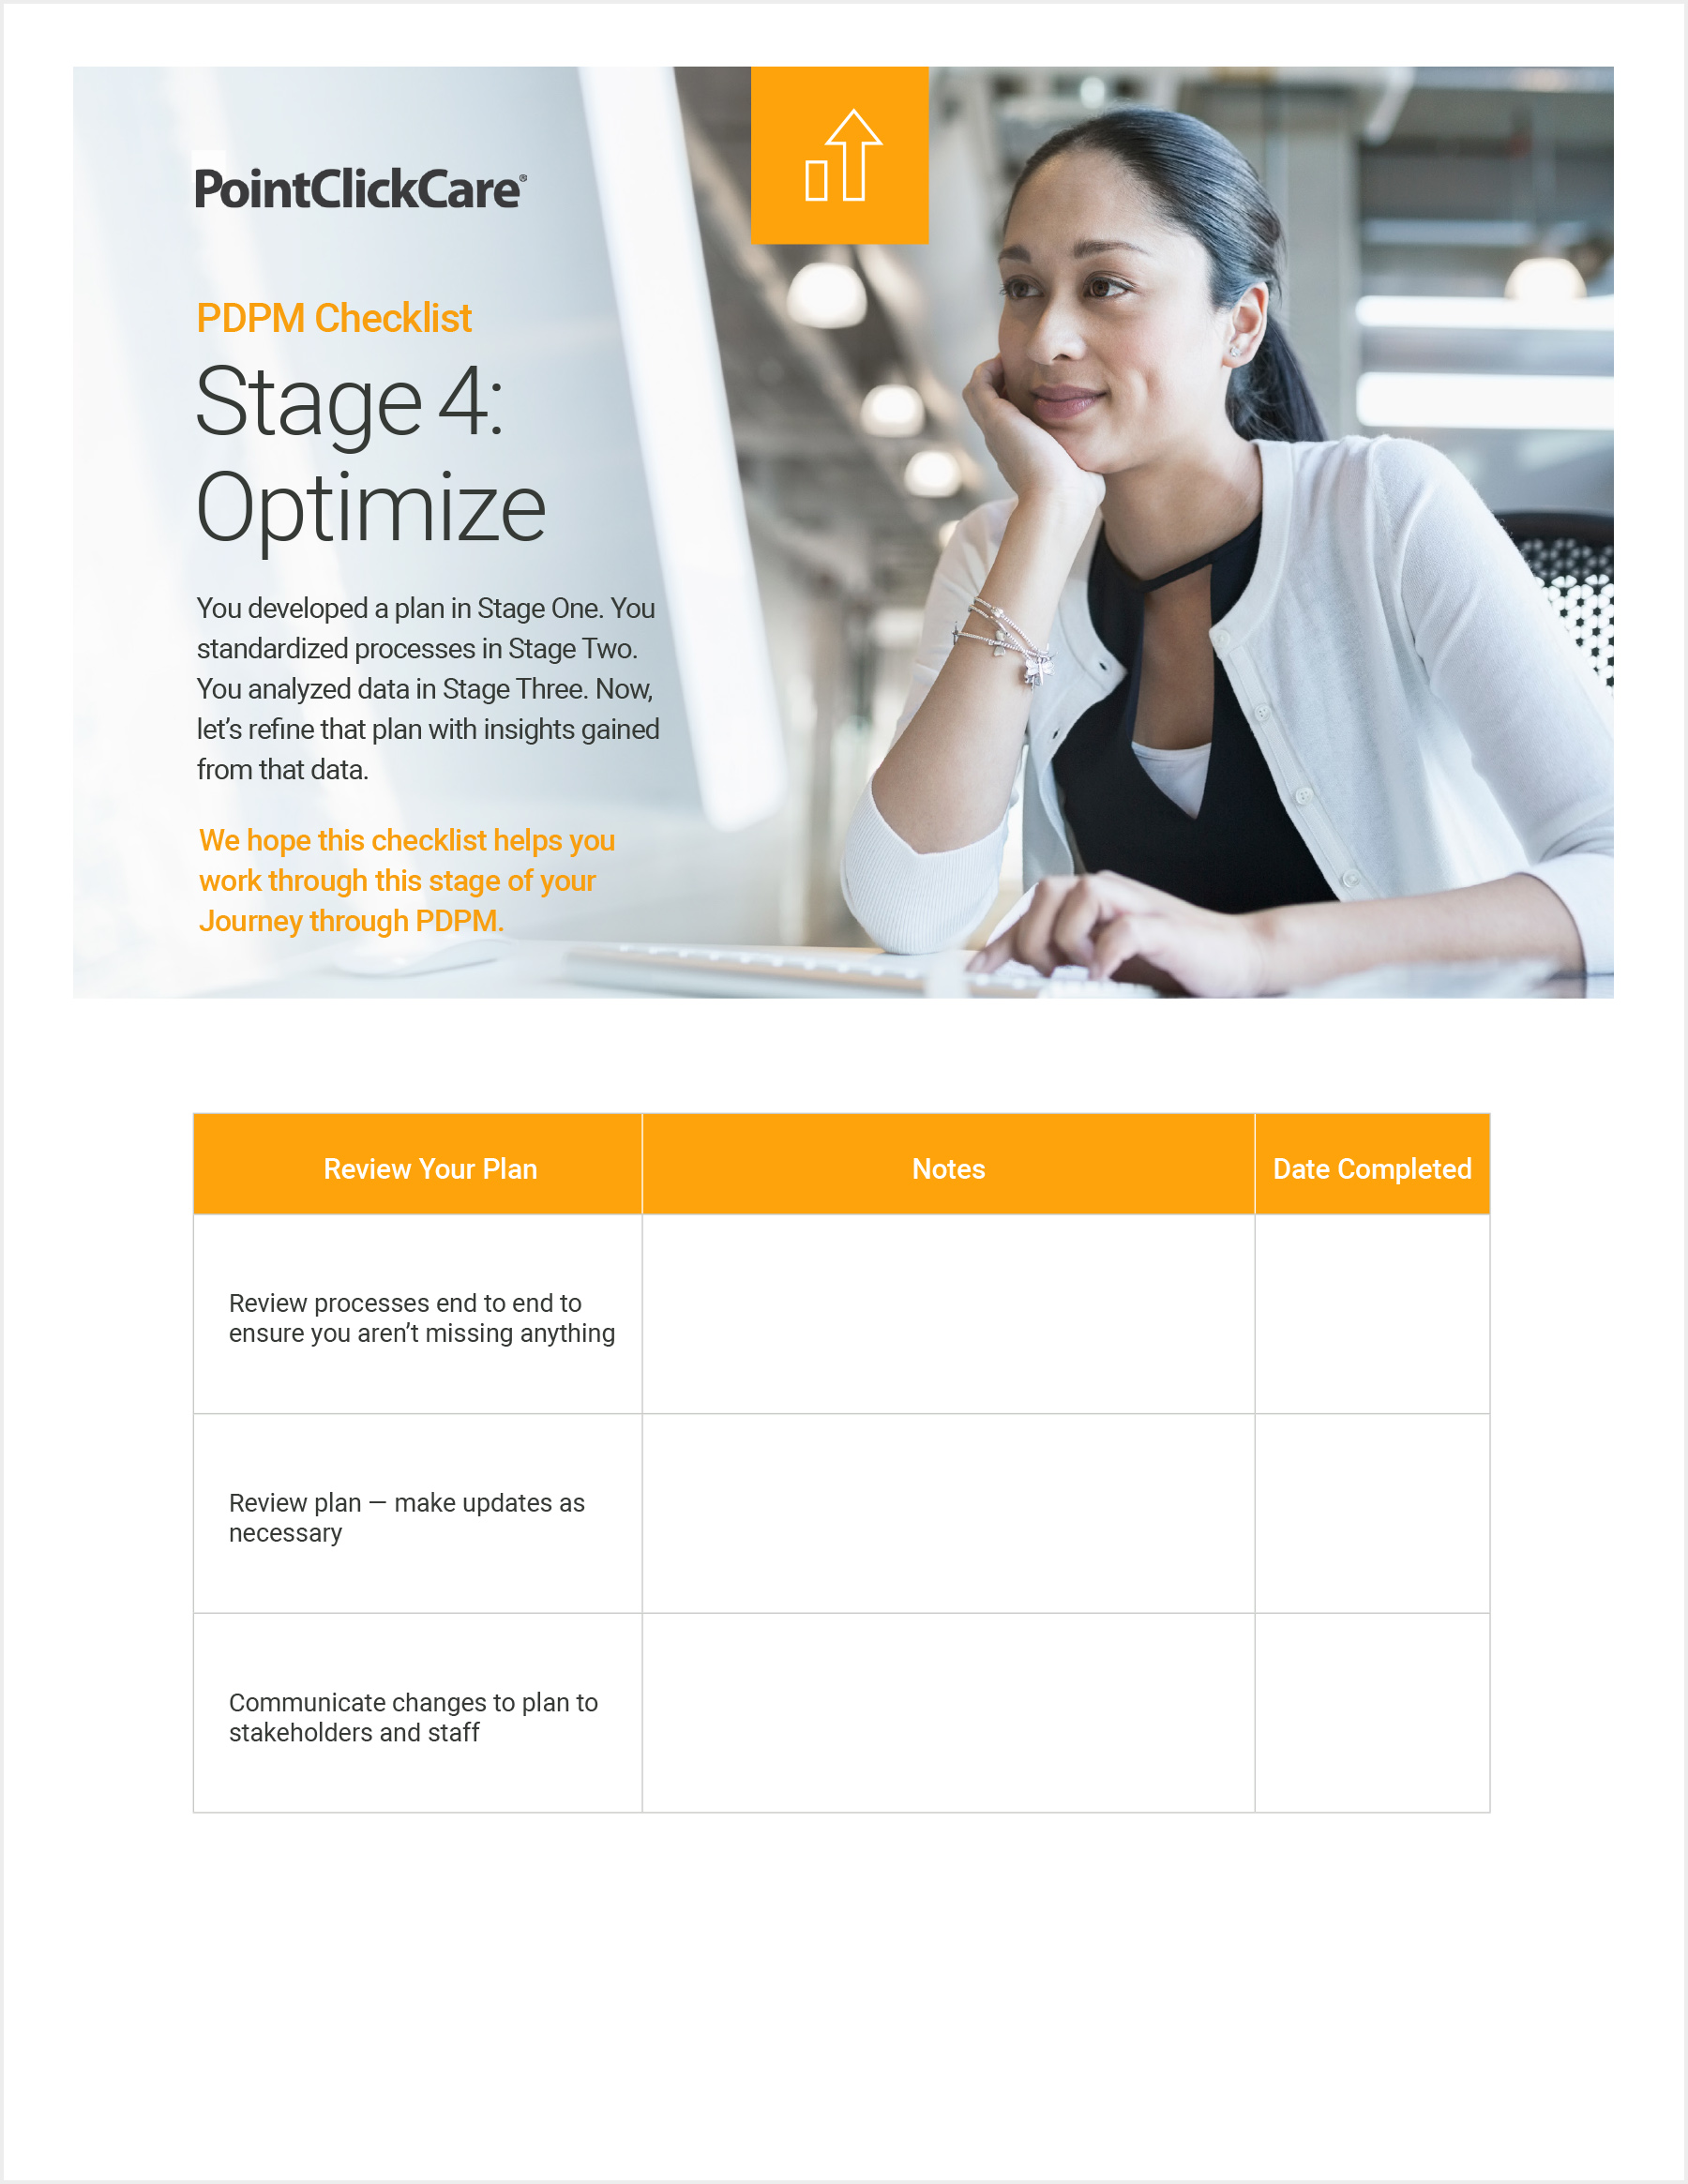 pdpm-checklist-stage-4-optimize-cover-pg